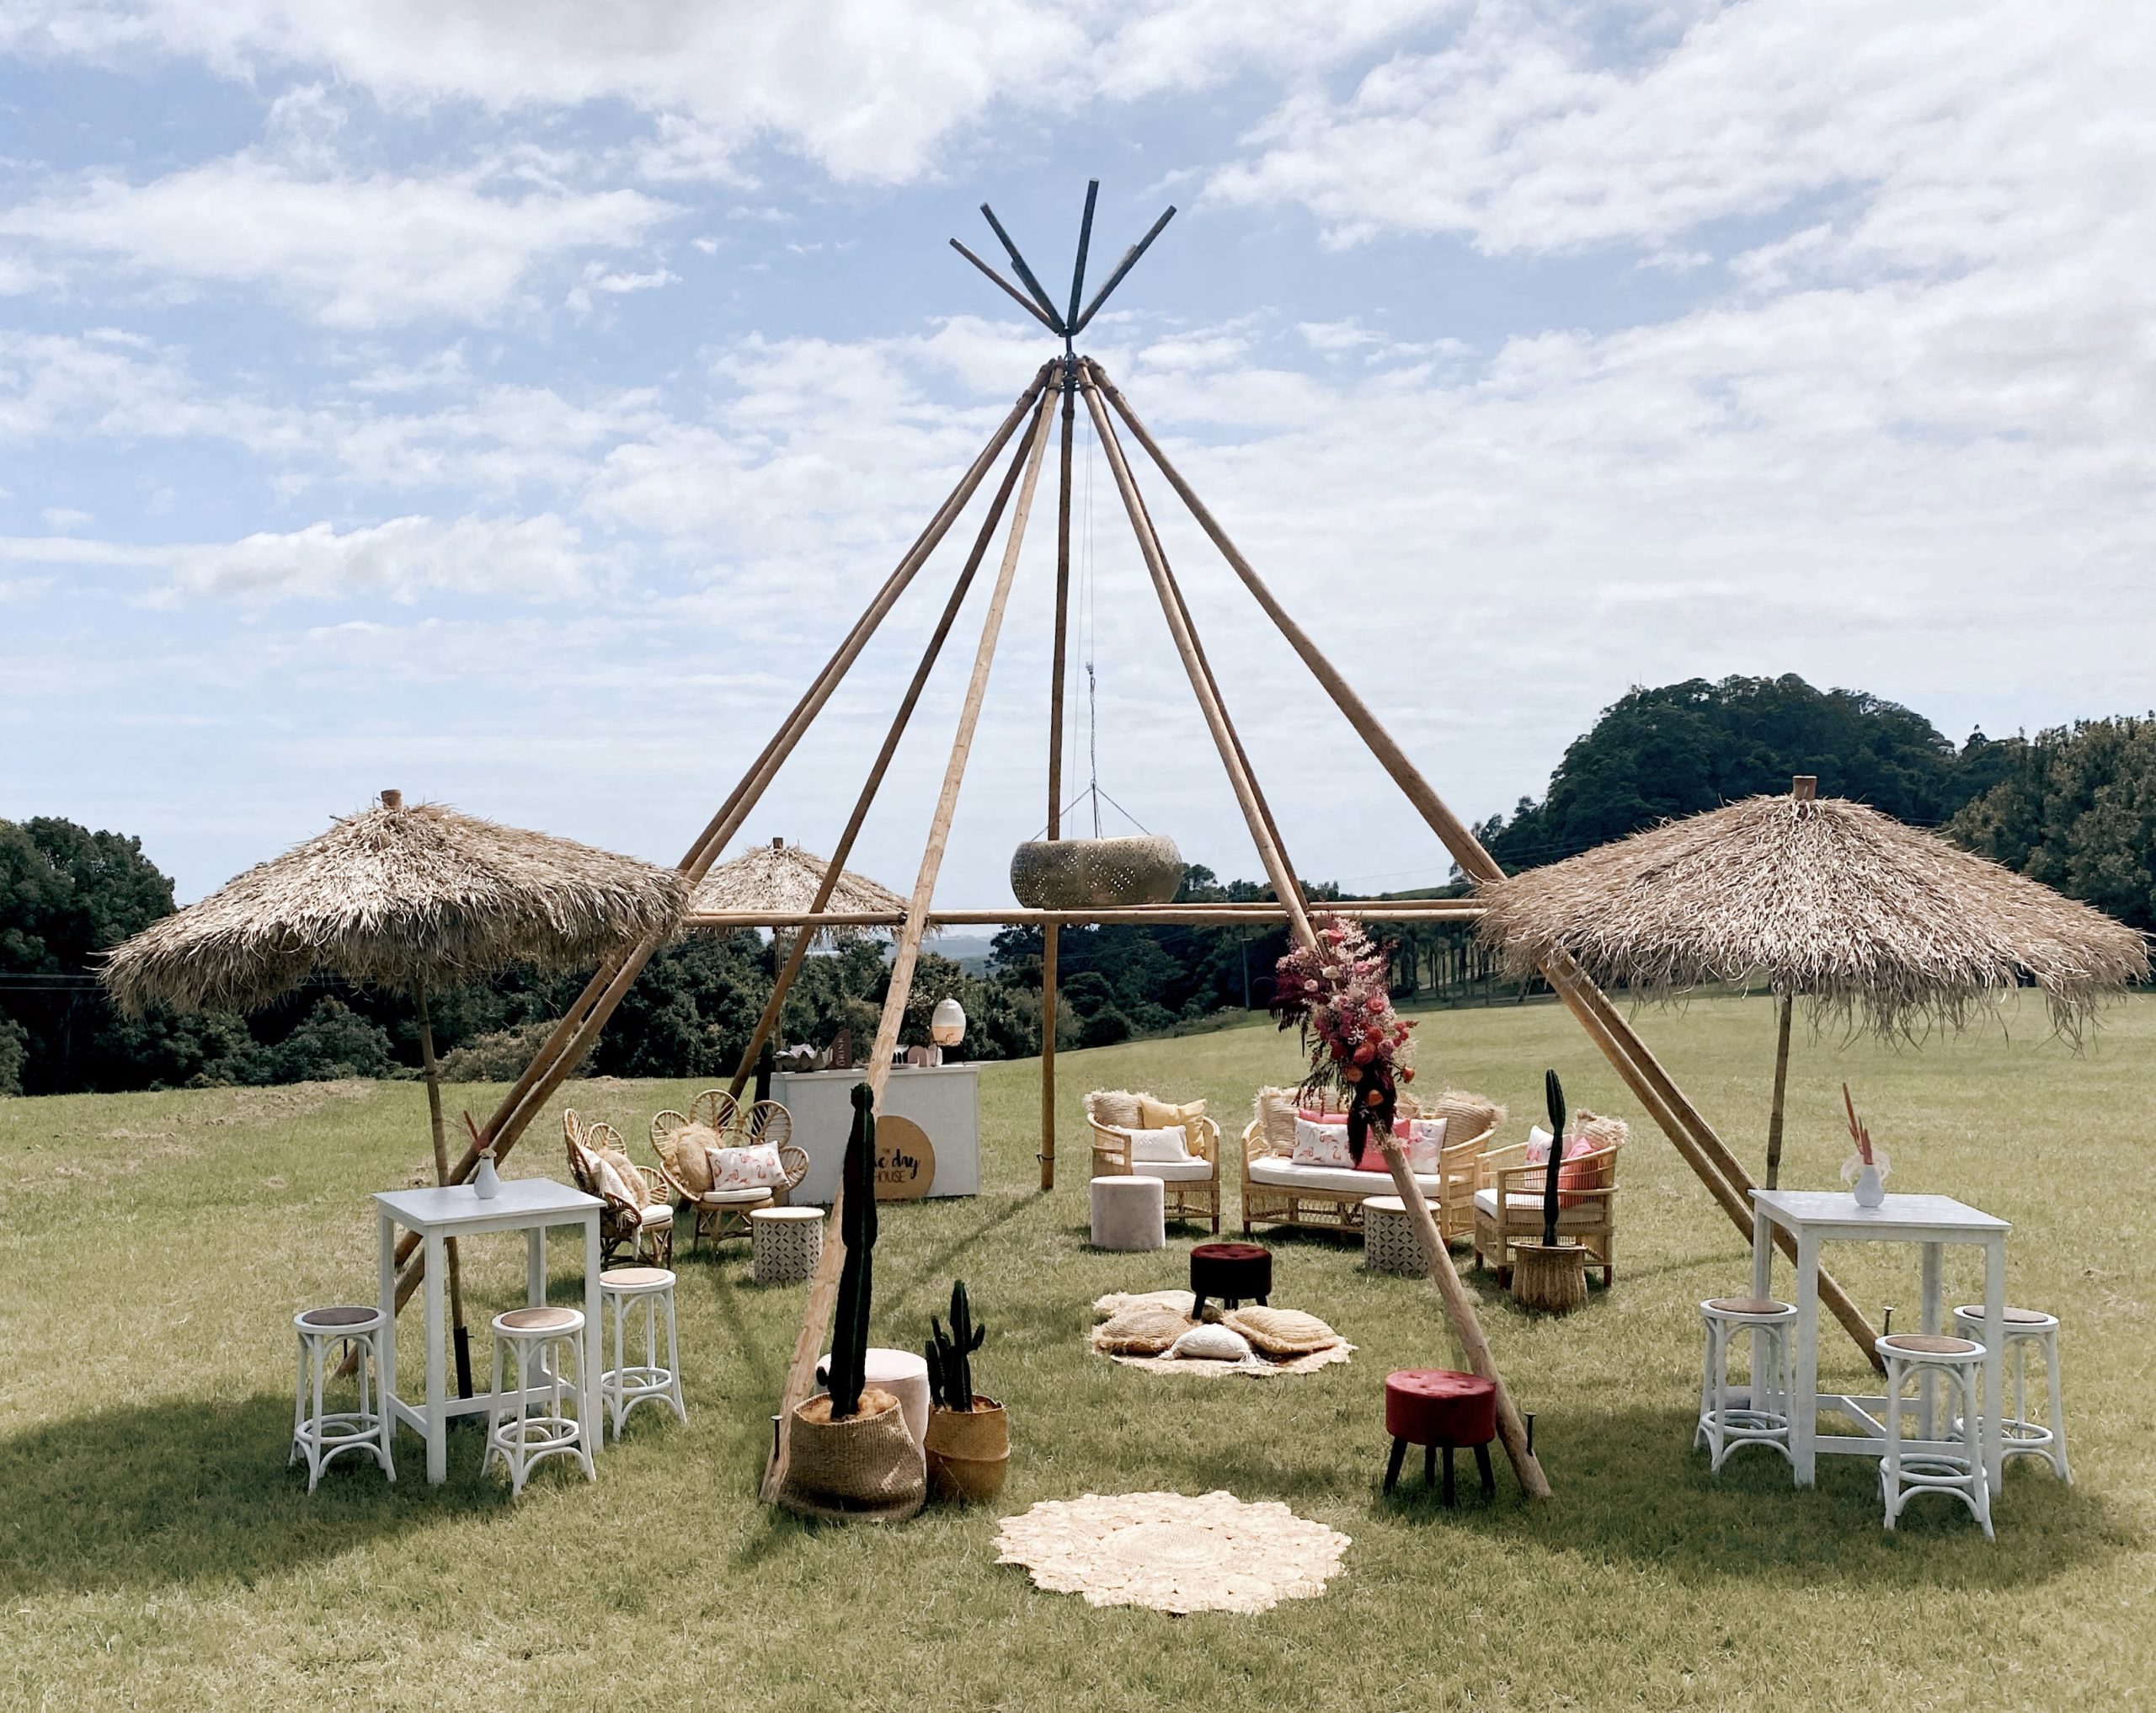 Naked kung party tipi with coachella vibes